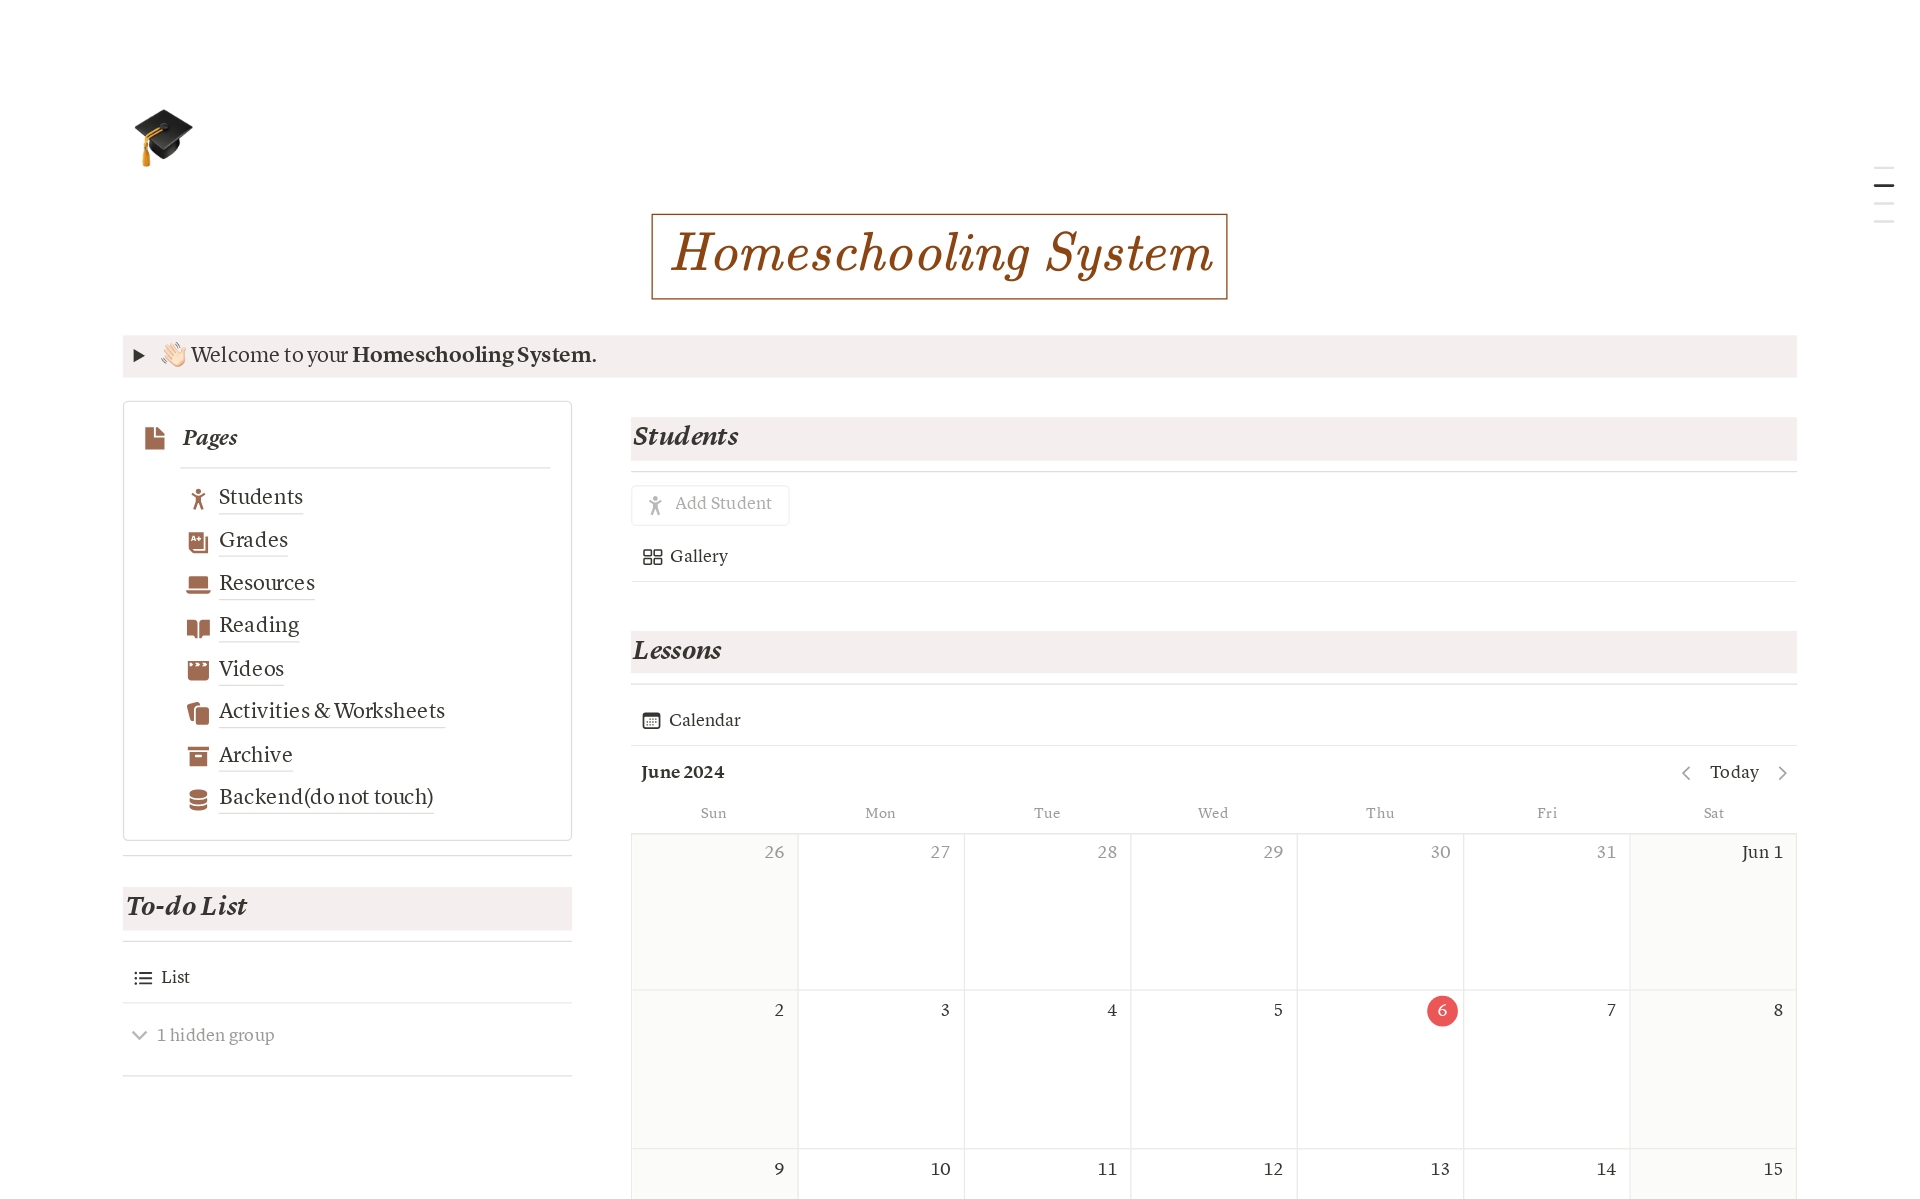 Homeschooling System, the ultimate tool to streamline and enhance your homeschooling experience. Designed for parents, this template offers everything you need to organize, plan, and track your children’s educational journey seamlessly.